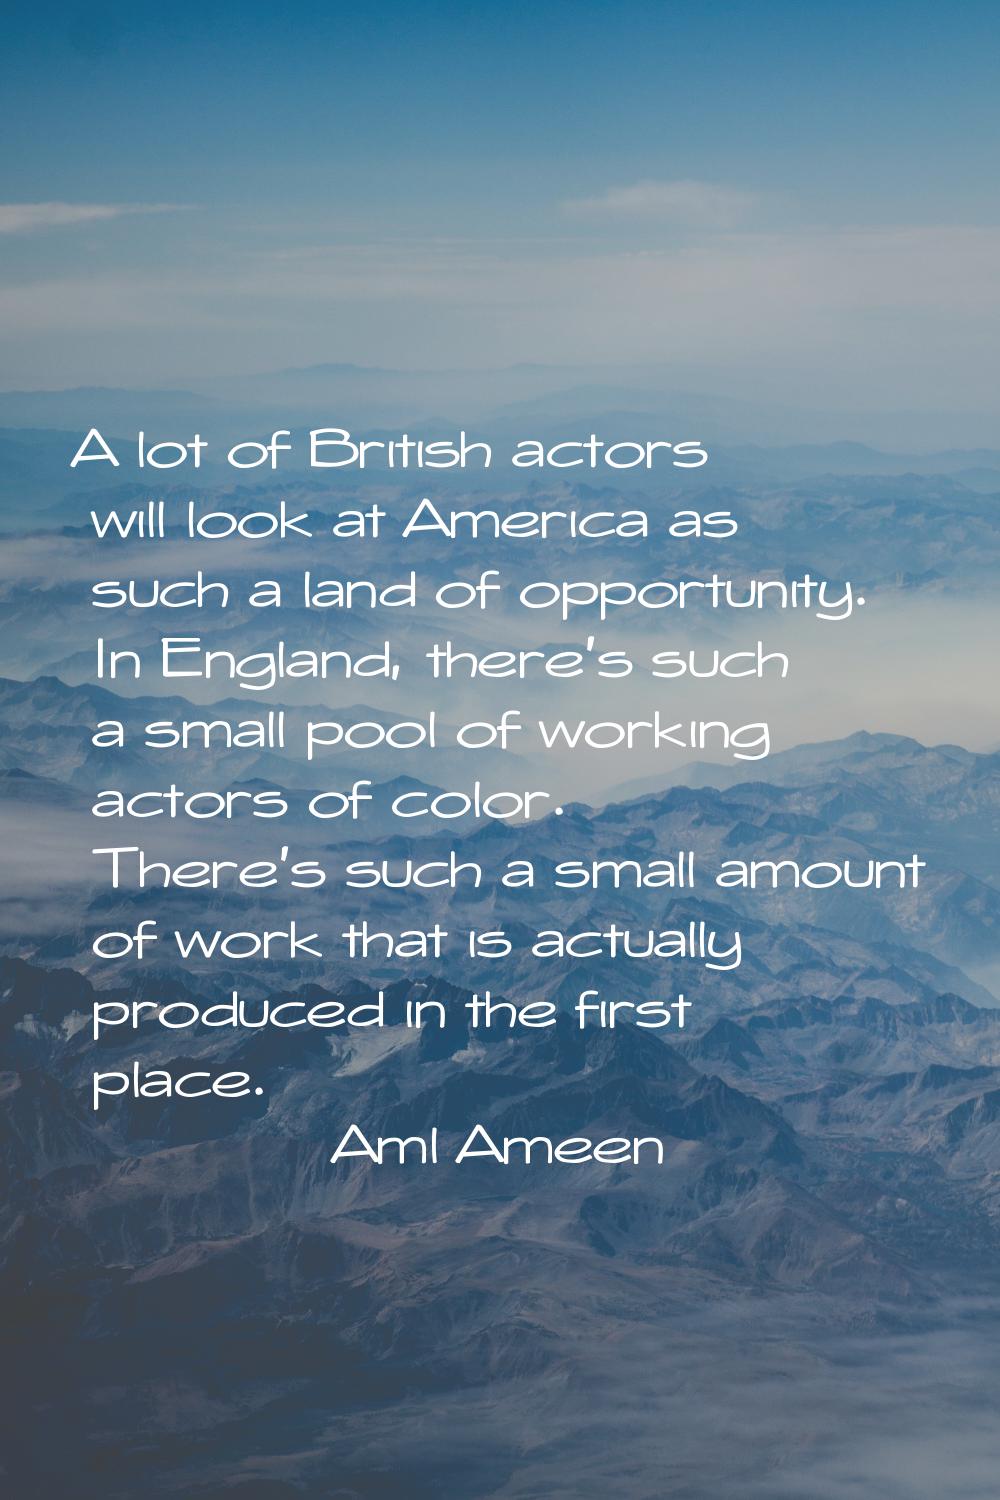 A lot of British actors will look at America as such a land of opportunity. In England, there's suc